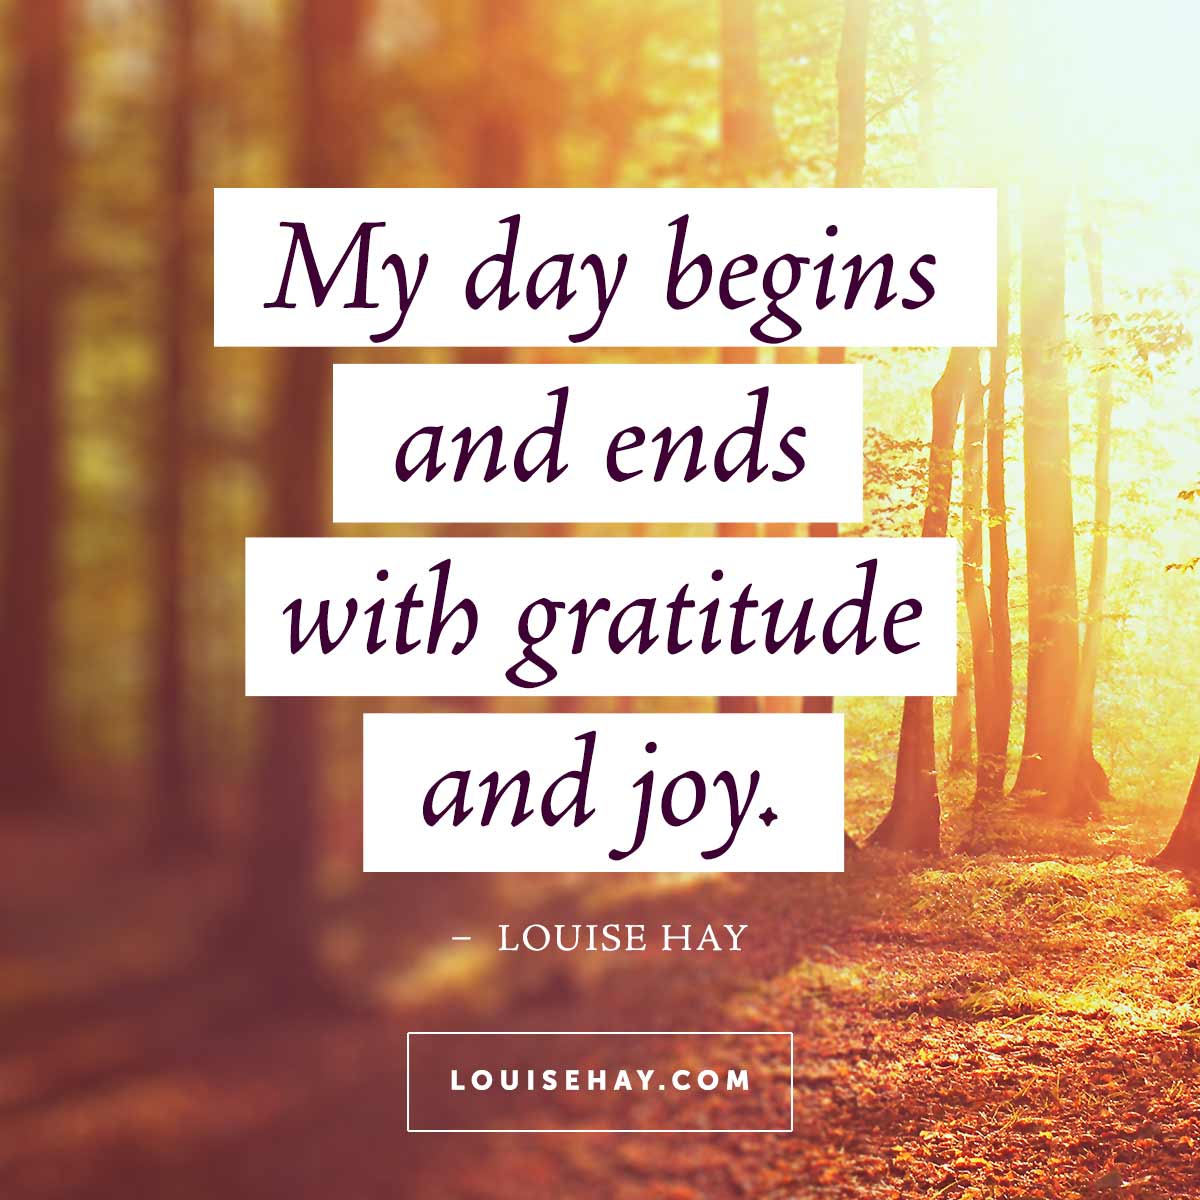 louise-hay-quotes-happiness-day-begins-ends-joy.jpg